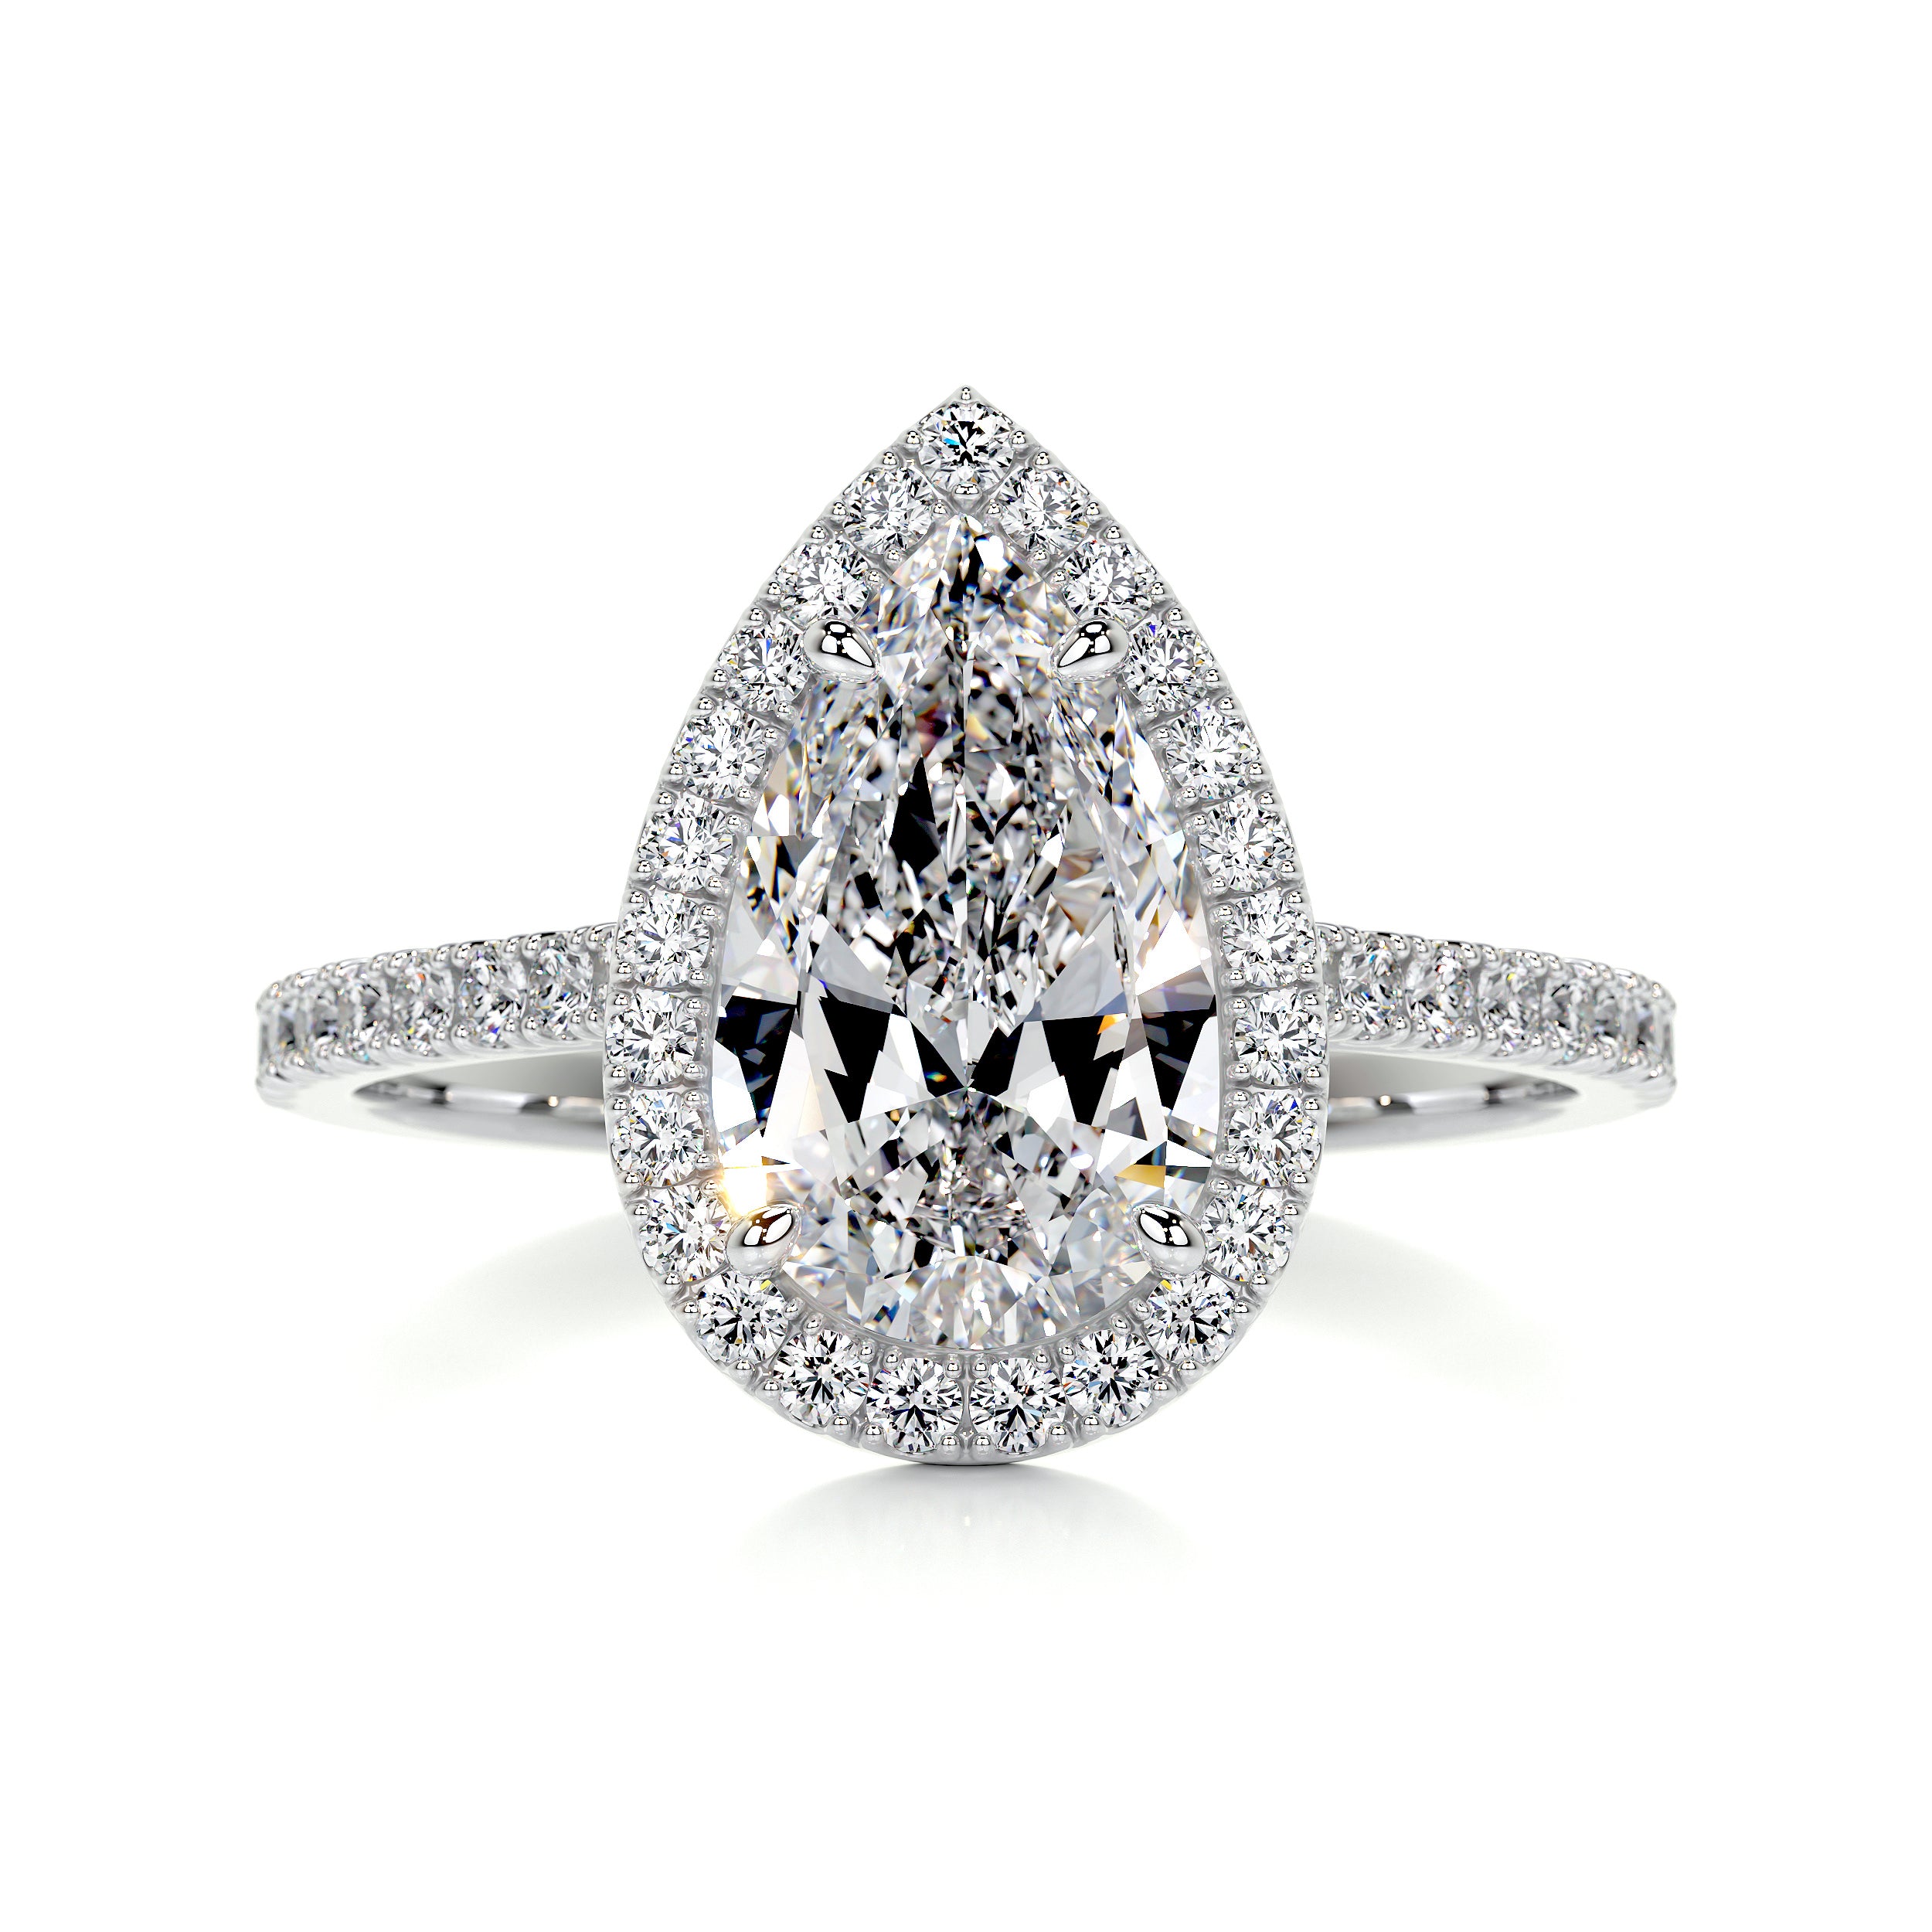 Vintage and unique engagement ring in white gold features a halo pear shape…  | Pear shaped diamond engagement rings, Engagement ring shapes, Unique engagement  rings